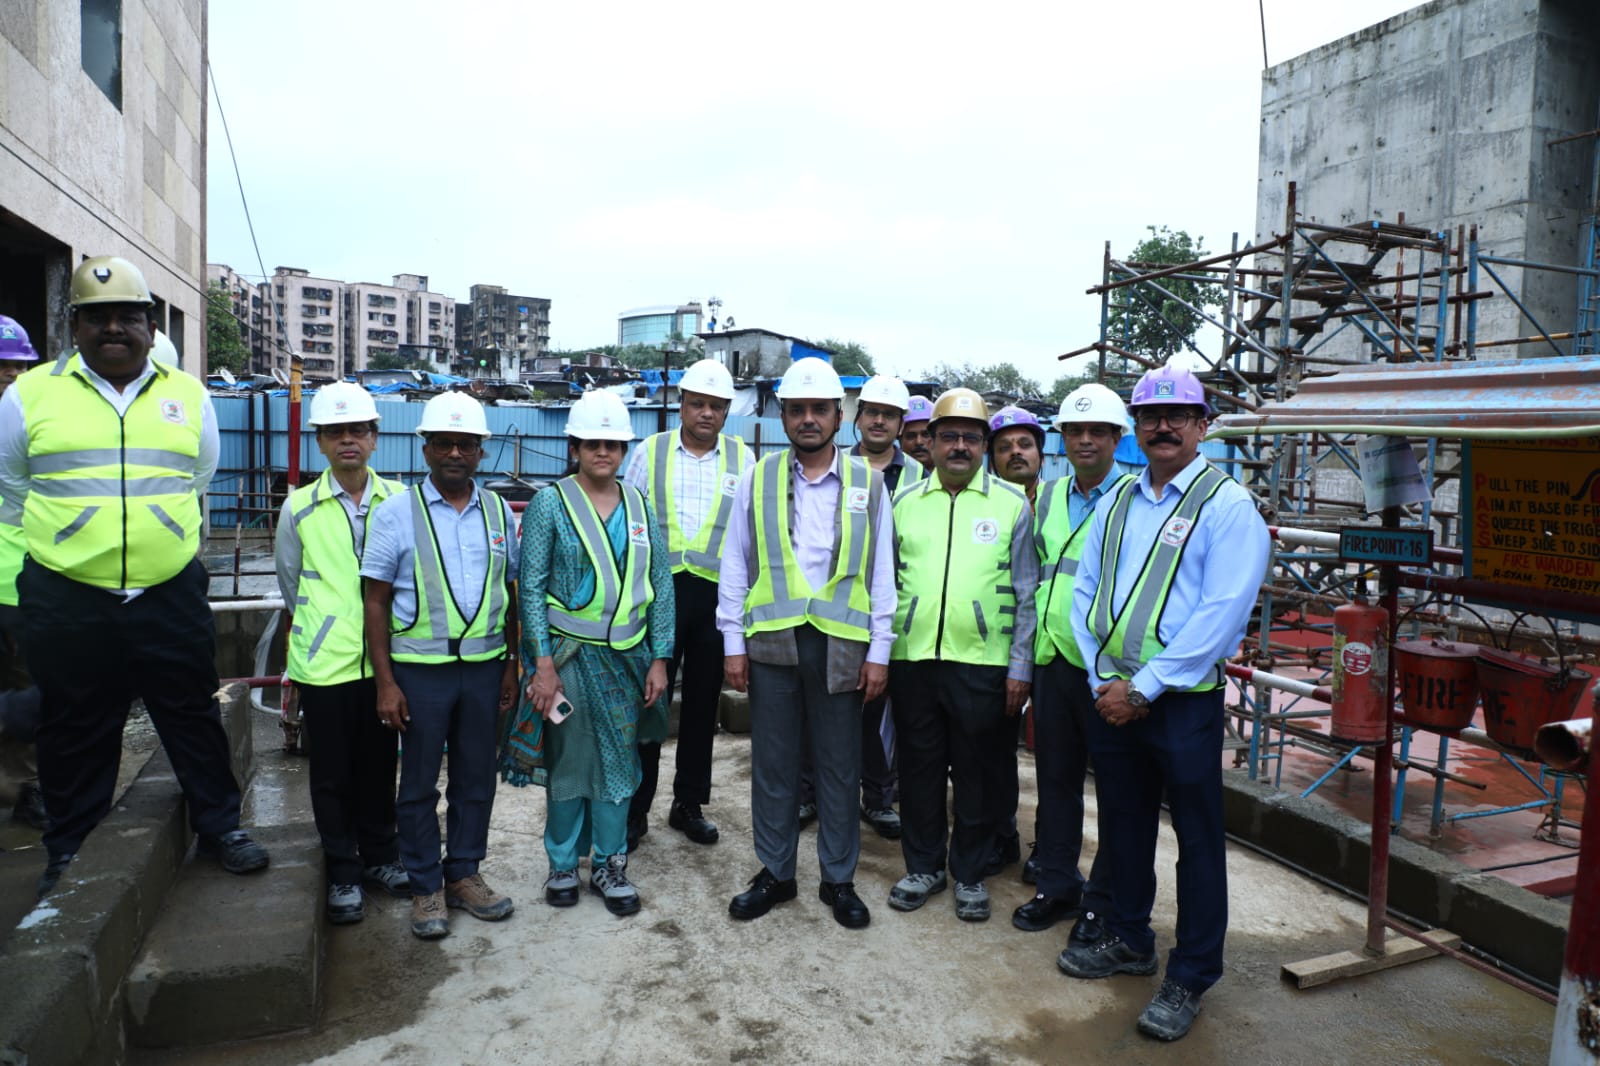 Progress of stations, tunnels, and other associated works of Mumbai Metro Line 3